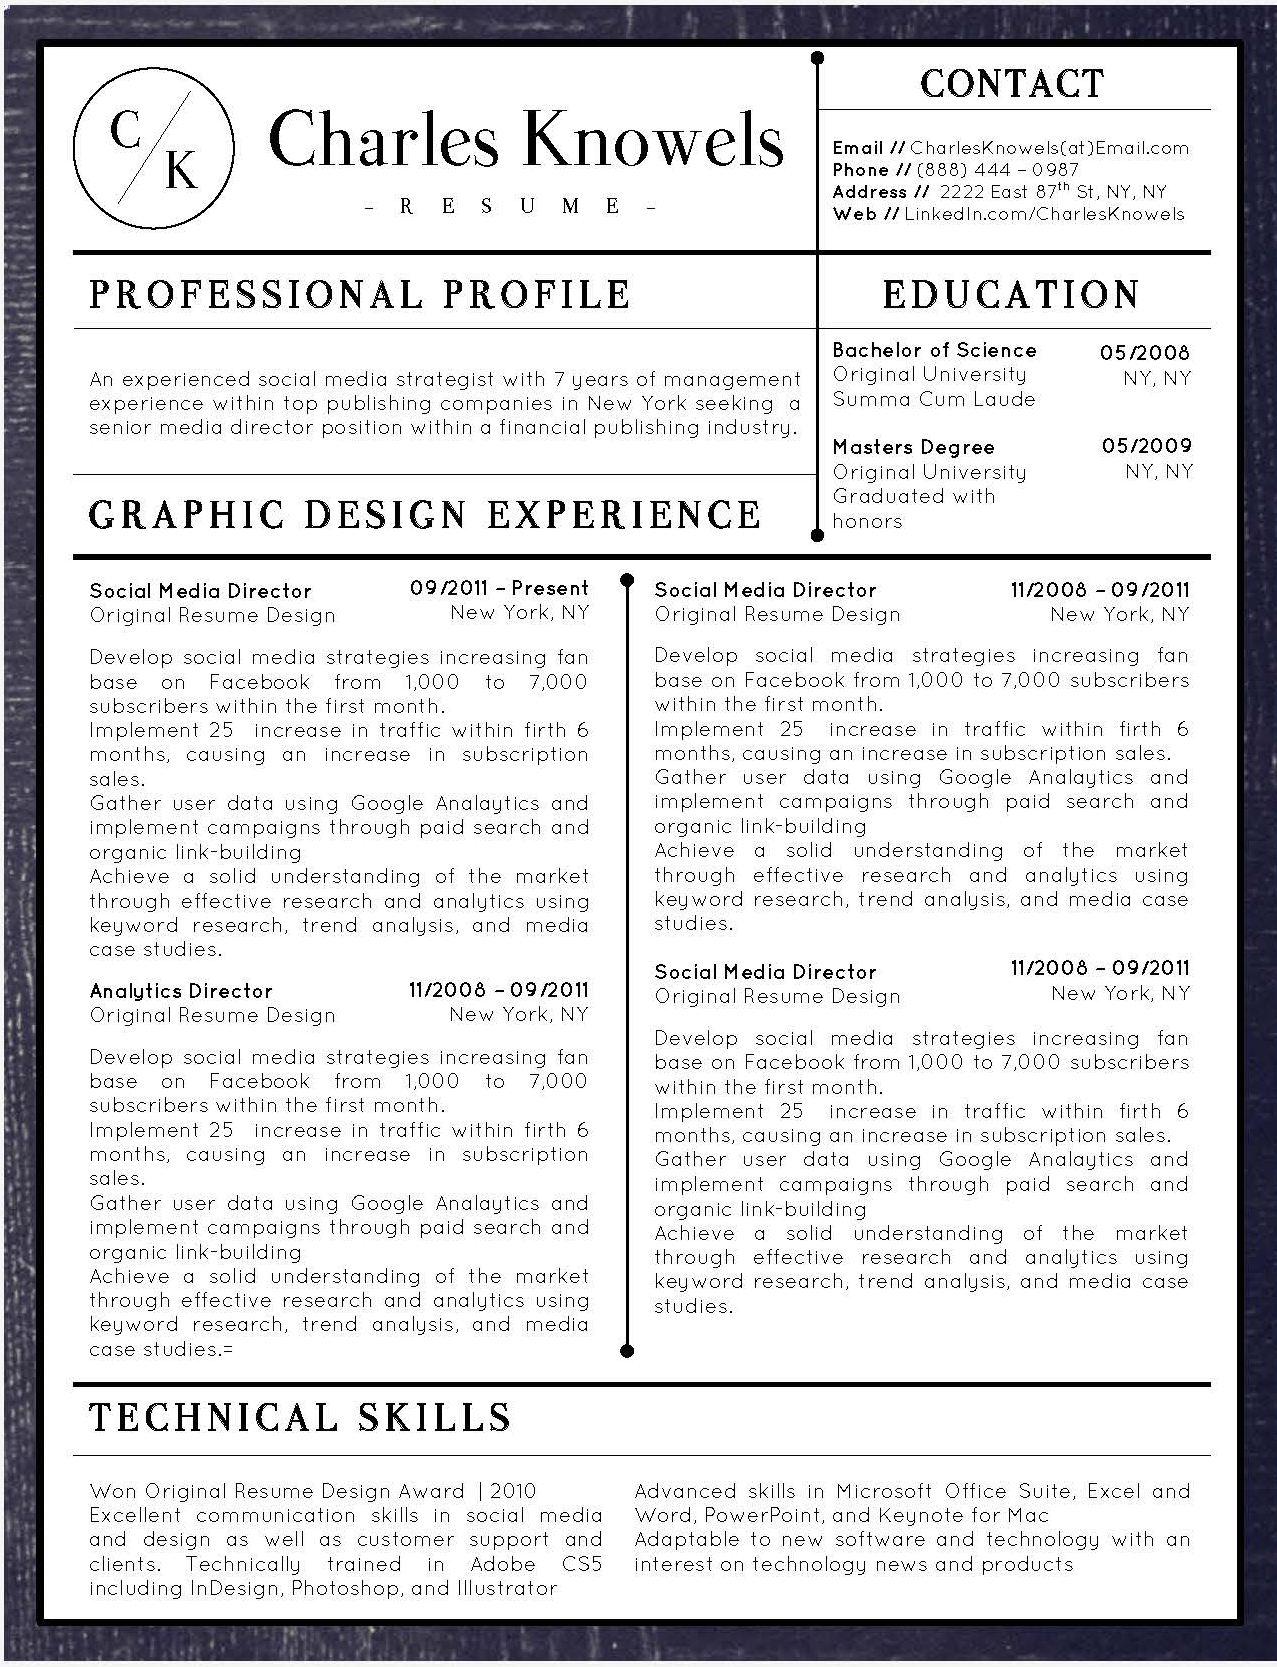 Charles Knowels - Resume Template for Word - 5 Best Clean Resume Templates Word of 2019